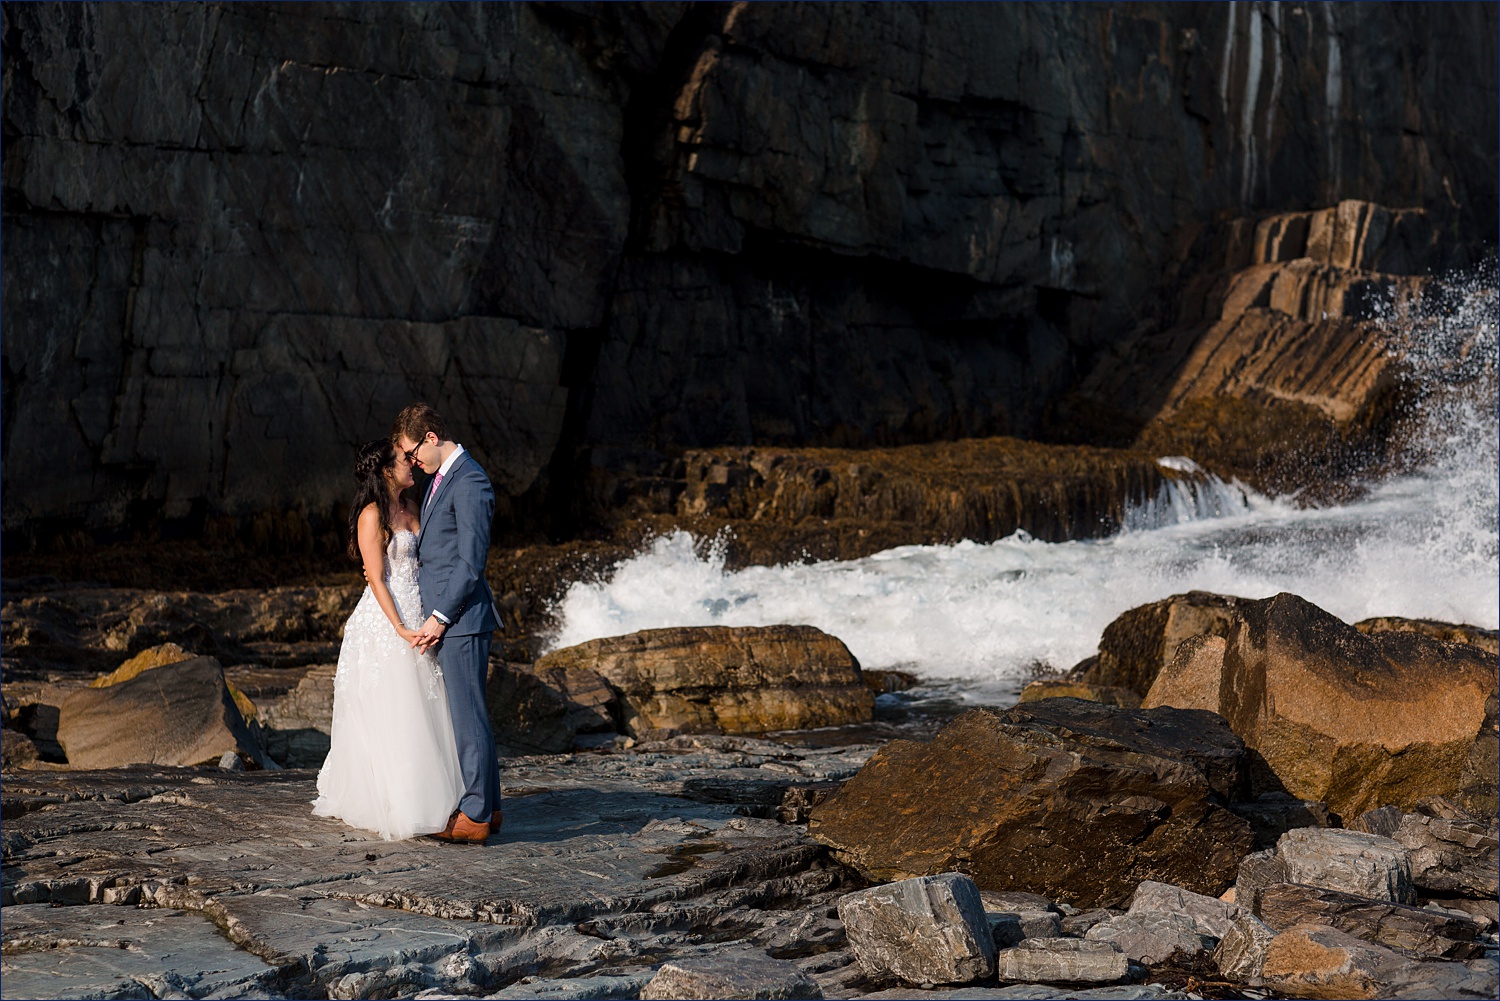 Nose to nose with the sea crashing around them at the Cliff House in Cape Neddick Maine on their elopement